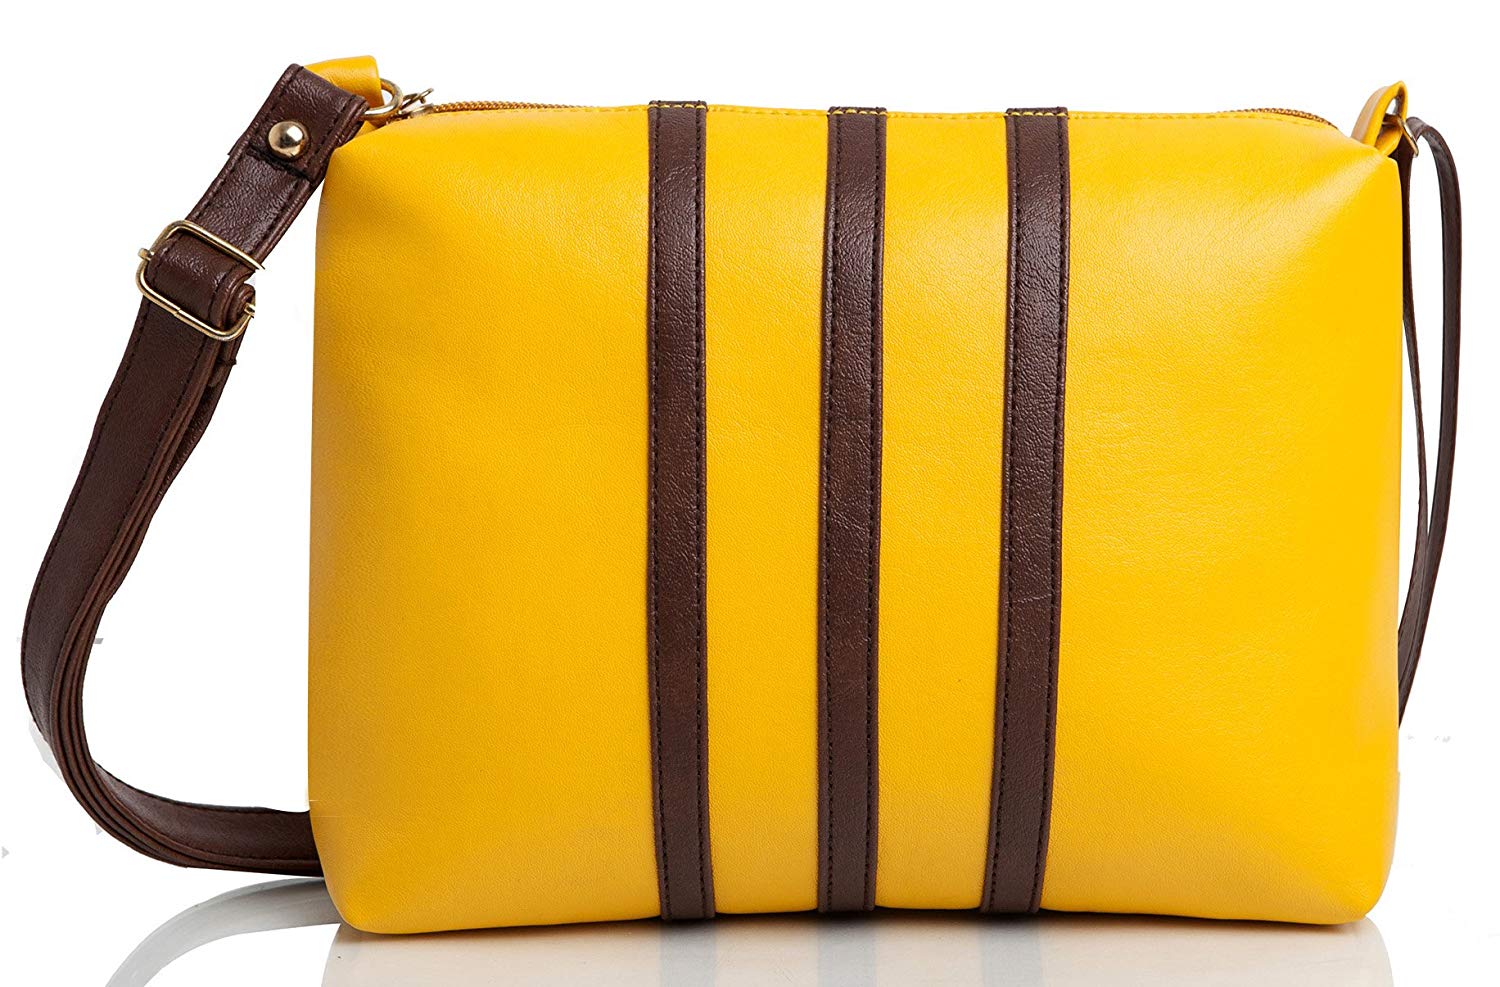 Buy 29K 3 Striped Women Sling Bag Yellow-Brown Online @ ₹799 from ShopClues